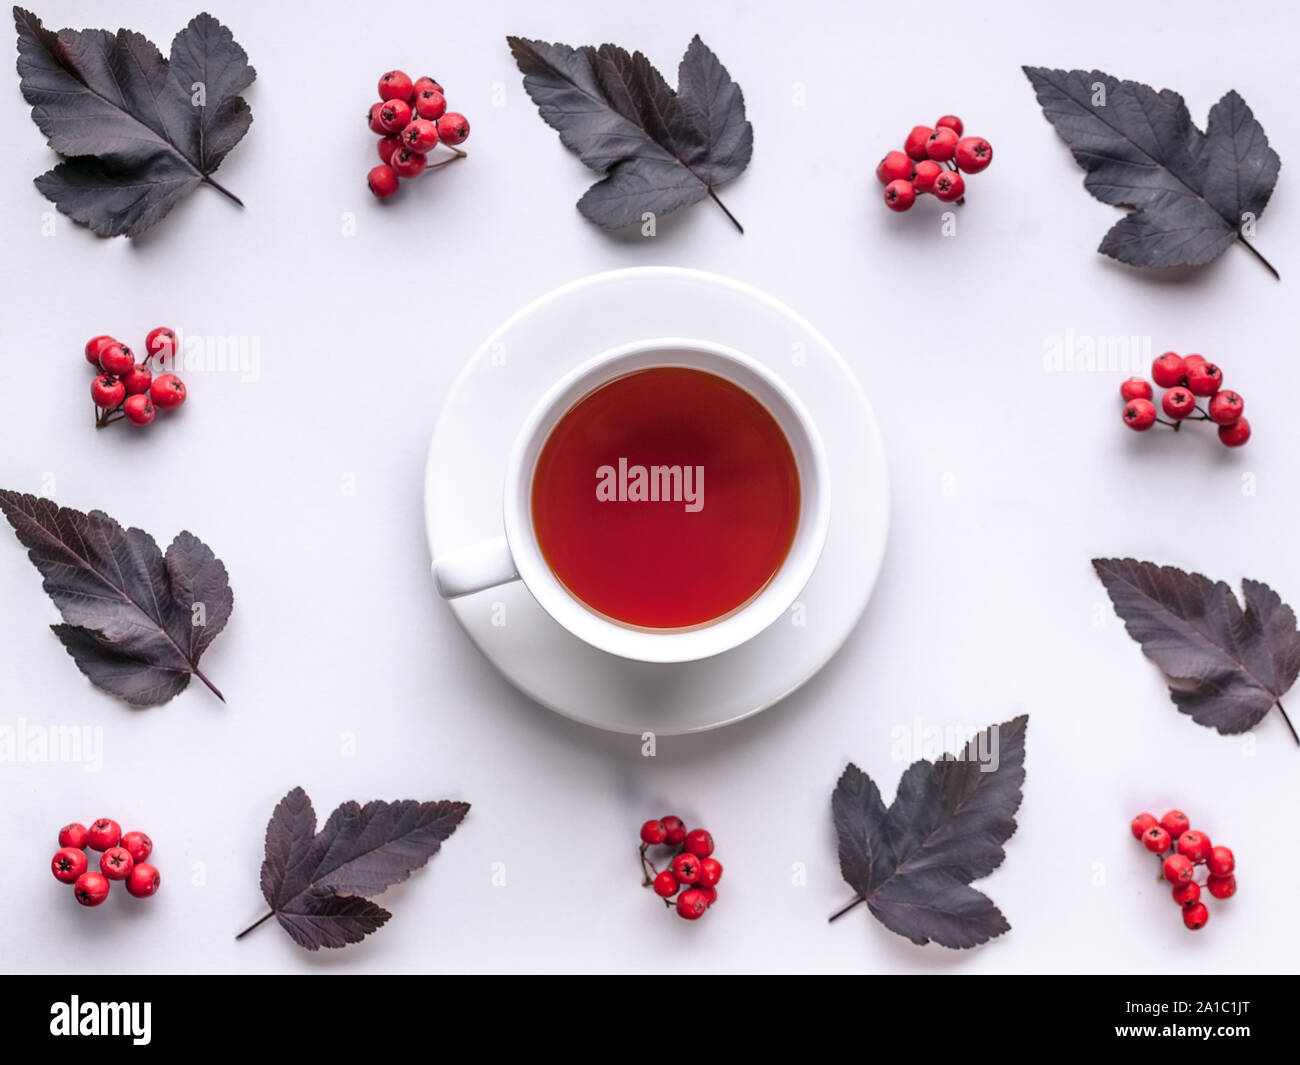 Leaves and berries top view. Autumn composition. Red foliage, ceramic teacup and small fruits on white background. Fallen leaf and rowanbery flat lay. Stock Photo